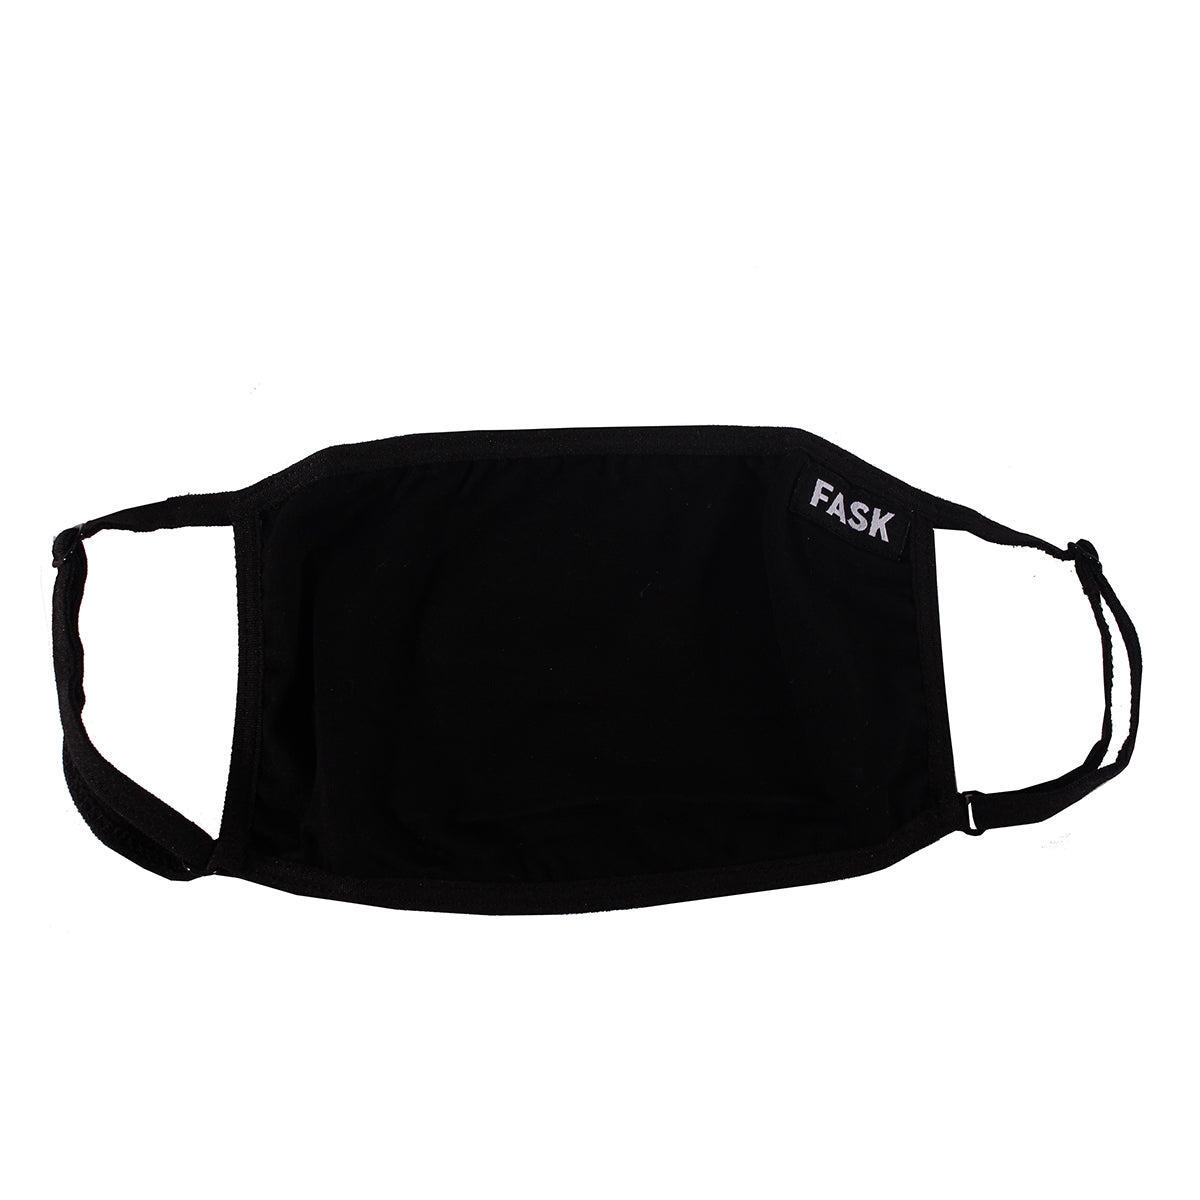 FASK Clean Cotton 2.0 Mask with Interchangeable Filter and Adjustable Size Strap